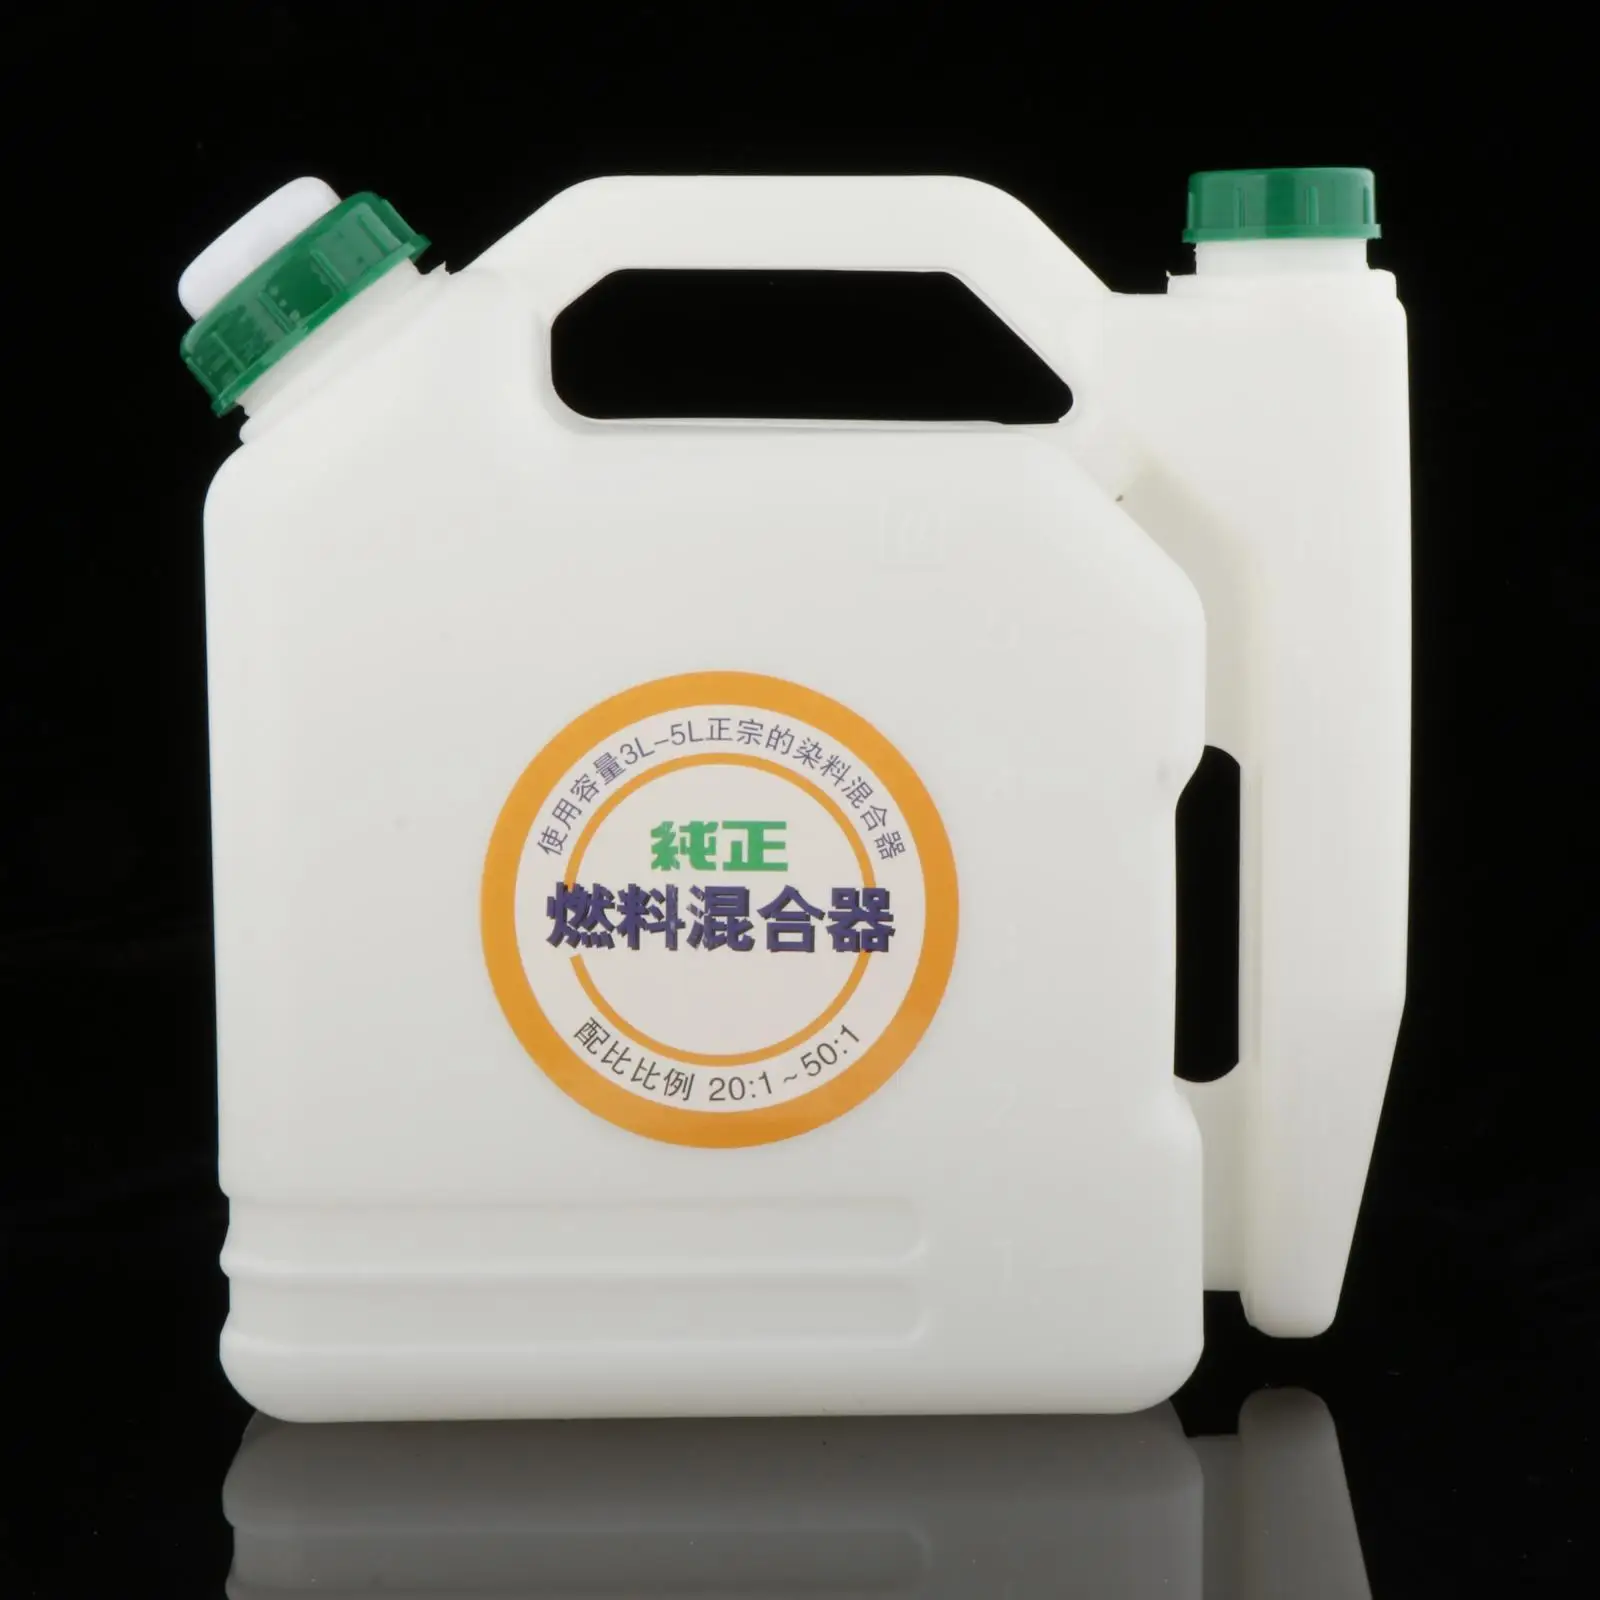   Gasoline Fuel Mixing Bottle 25:1/50:1/50:1/20:1 for Lawn Mowers